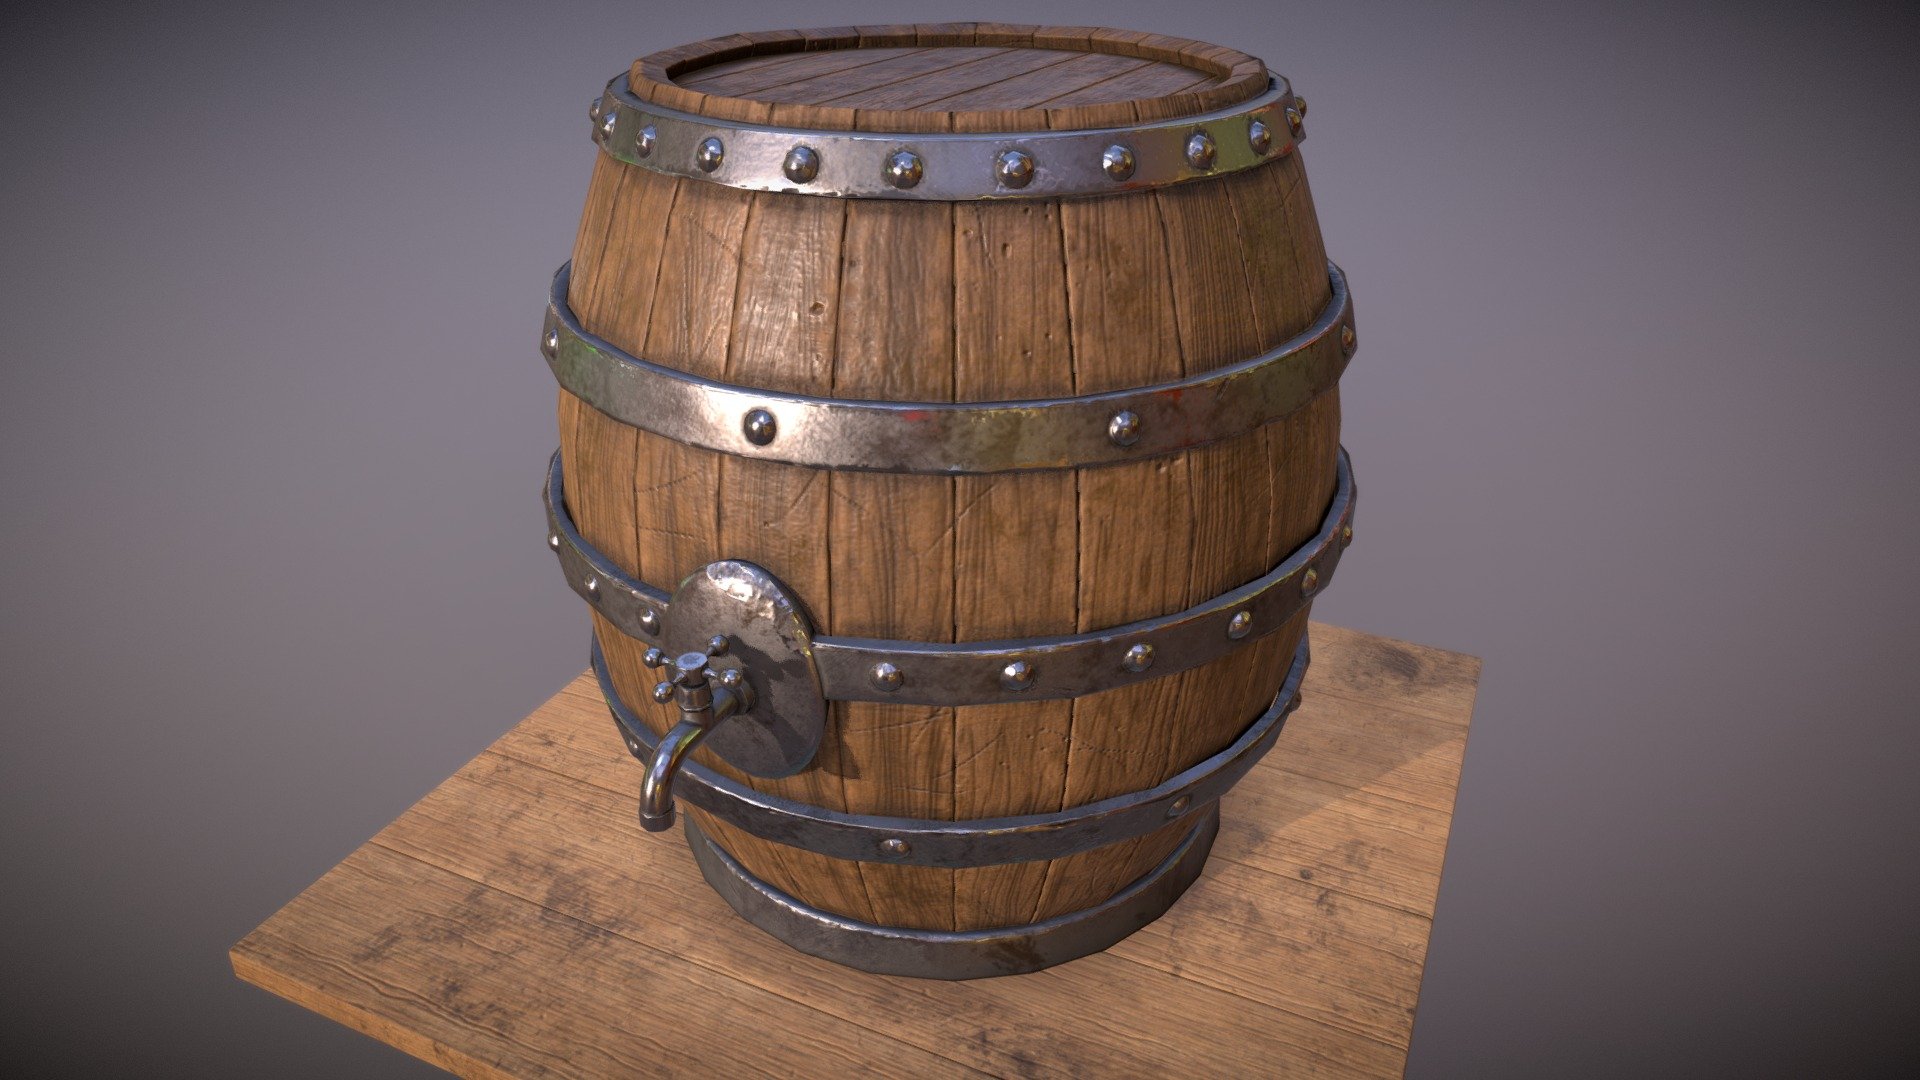 I was find concept of this barrel in internet, and wasn't able to find author of this. I was inspired of it and decide to create this model as personal project 3d model